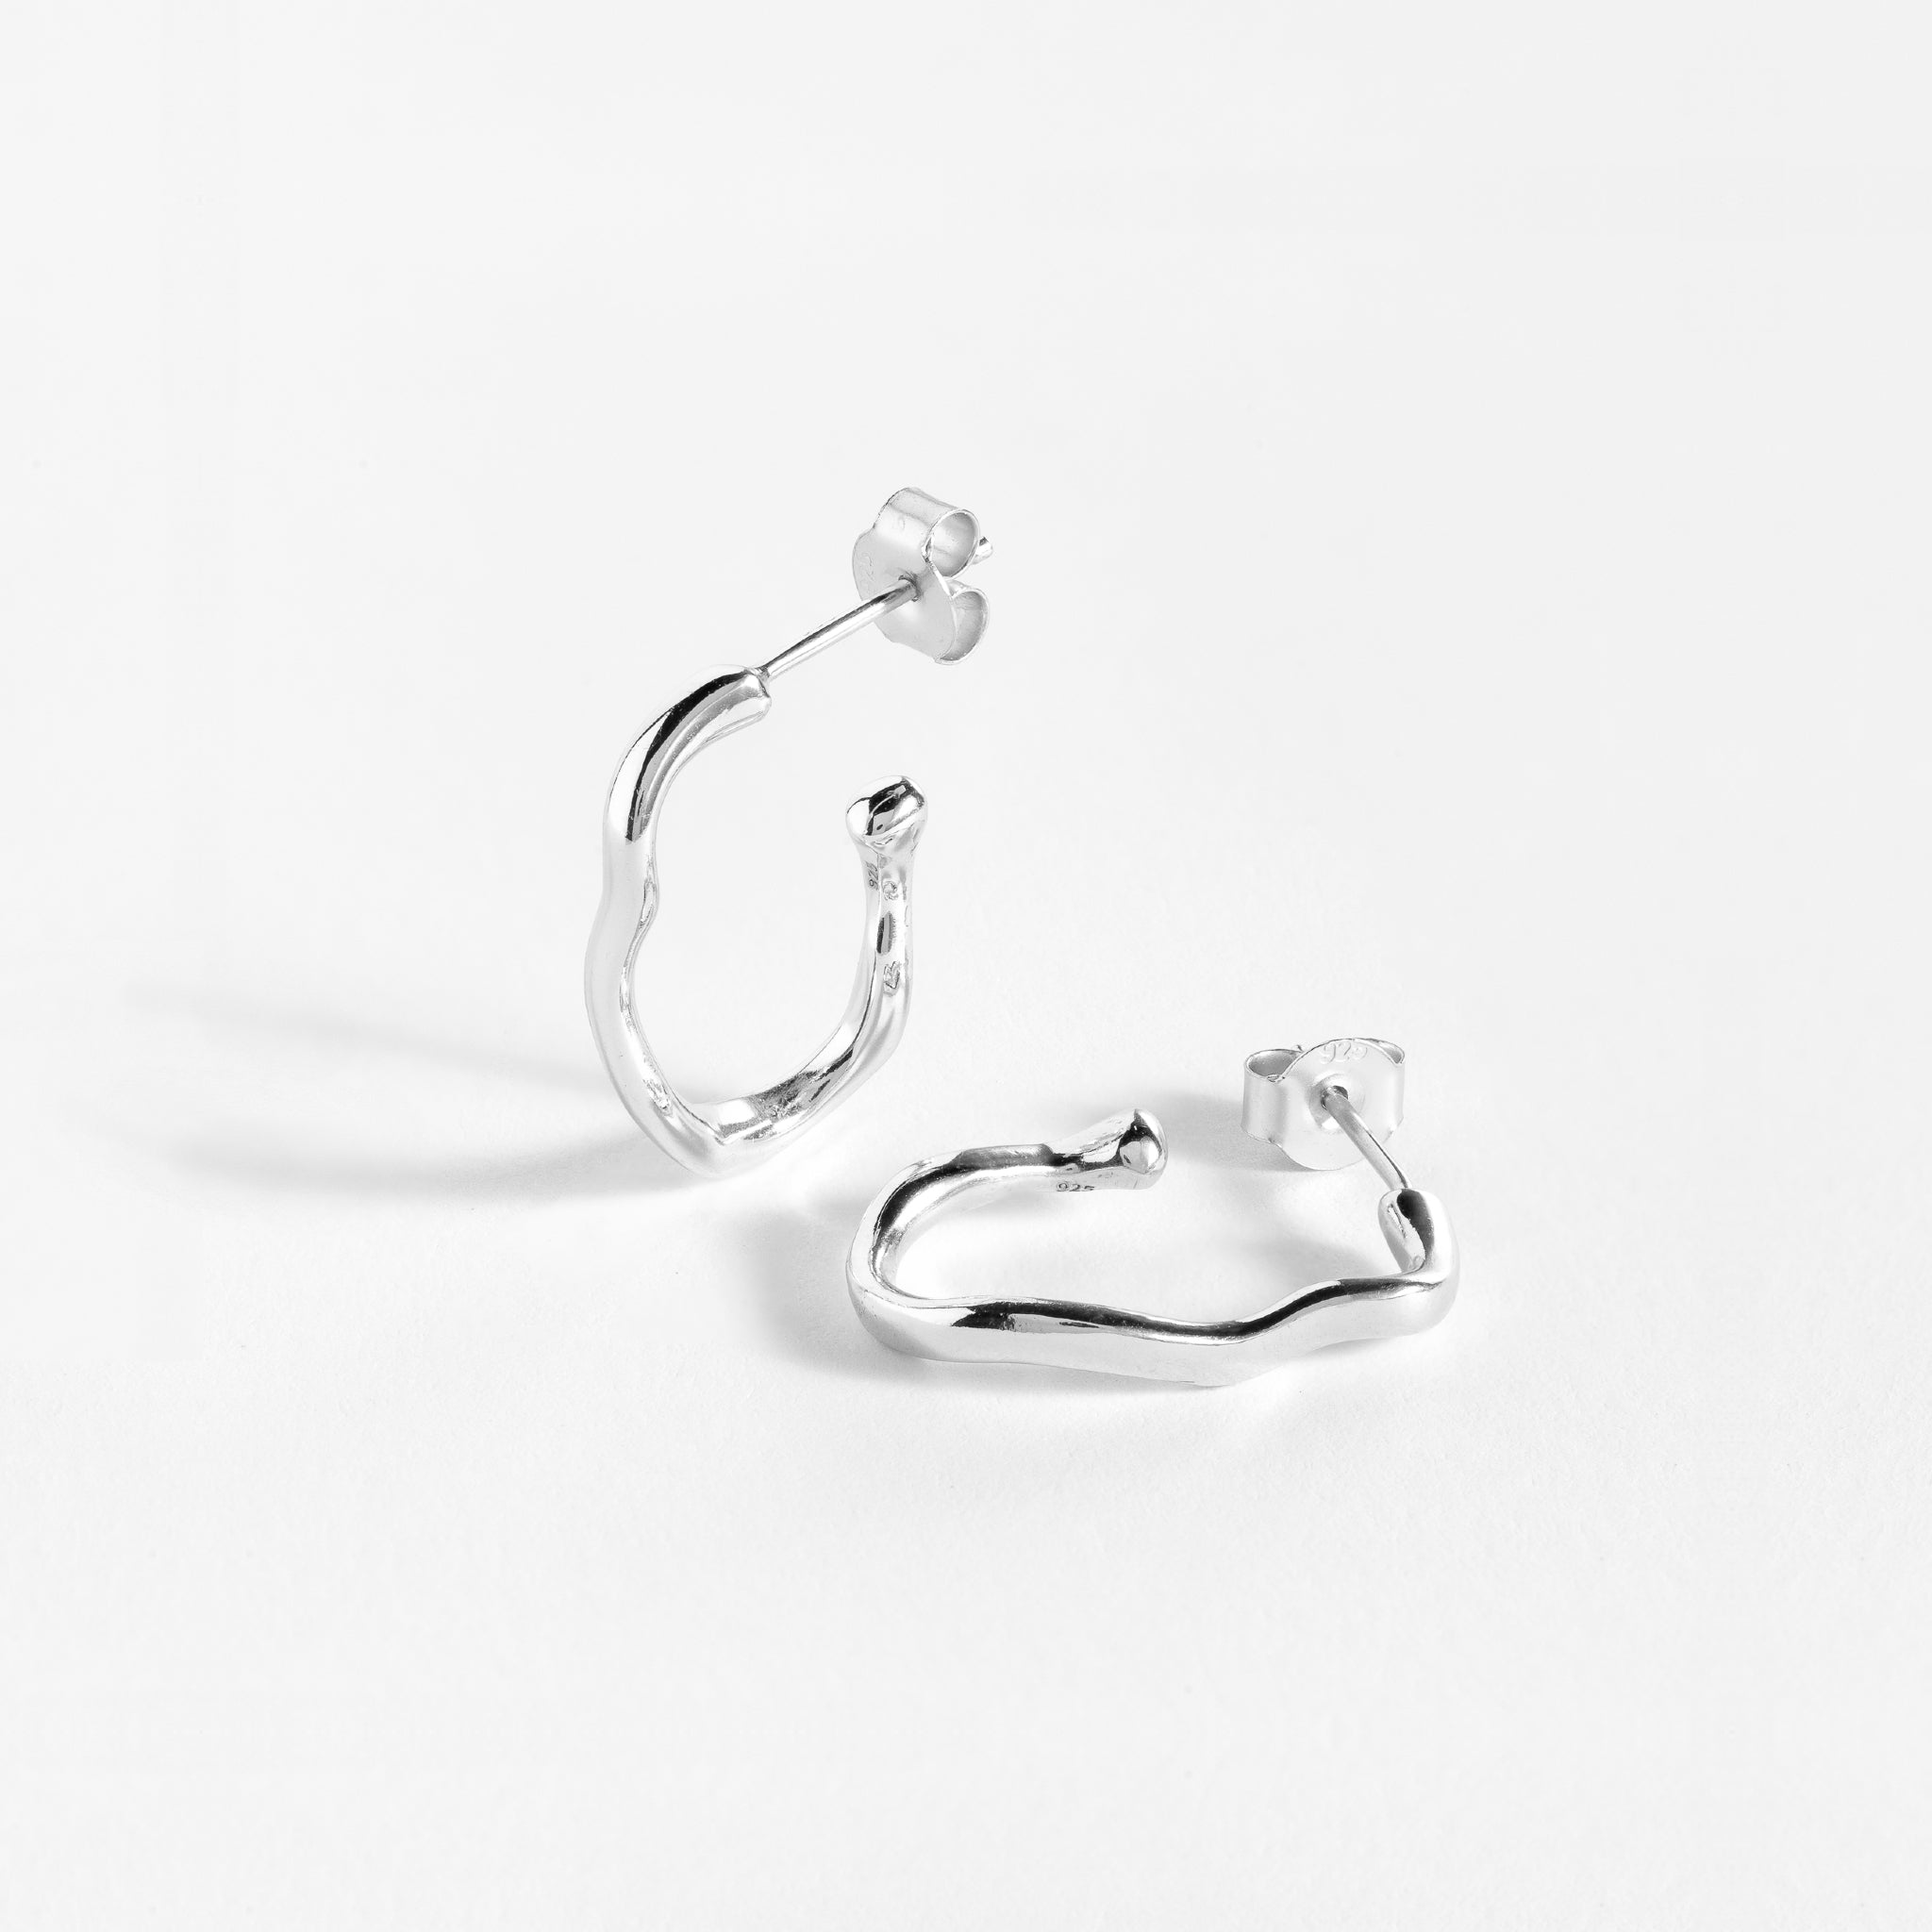 Earring features a handcut natural ripple shape and is crafted from sterling silver or 18ct gold vermeil.